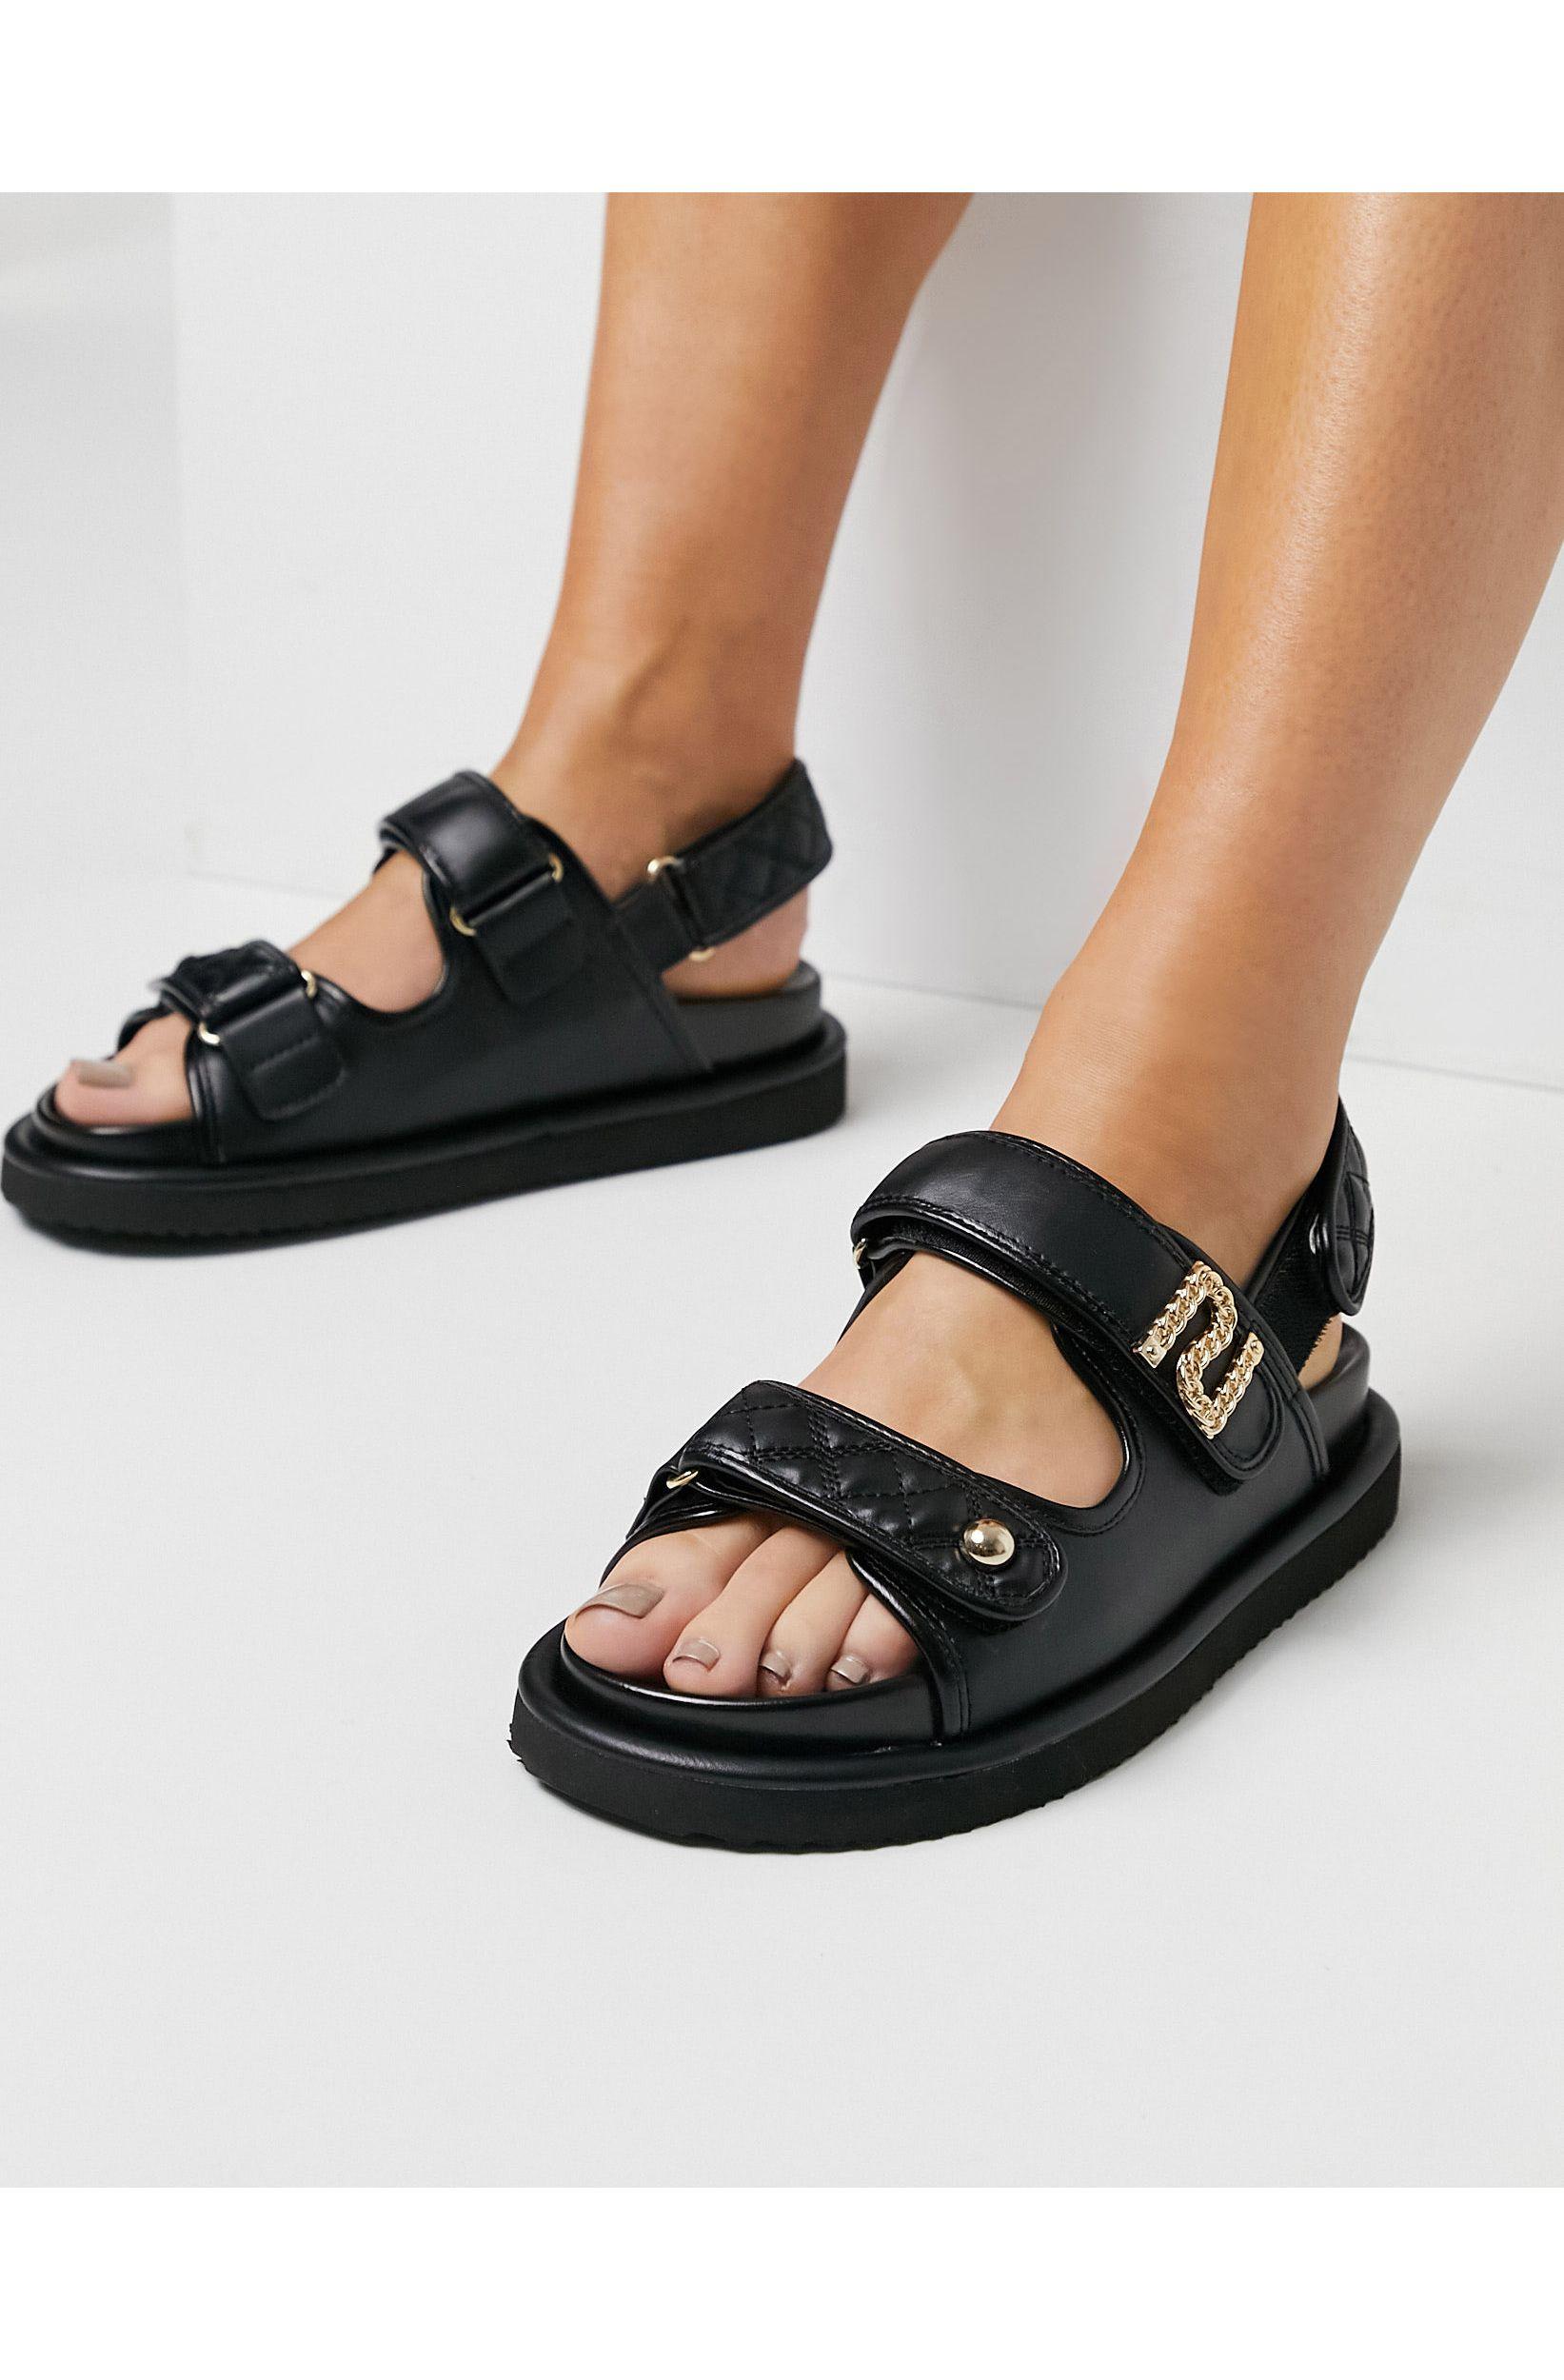 River Island Quilted Sporty Flat Sandal in Black | Lyst